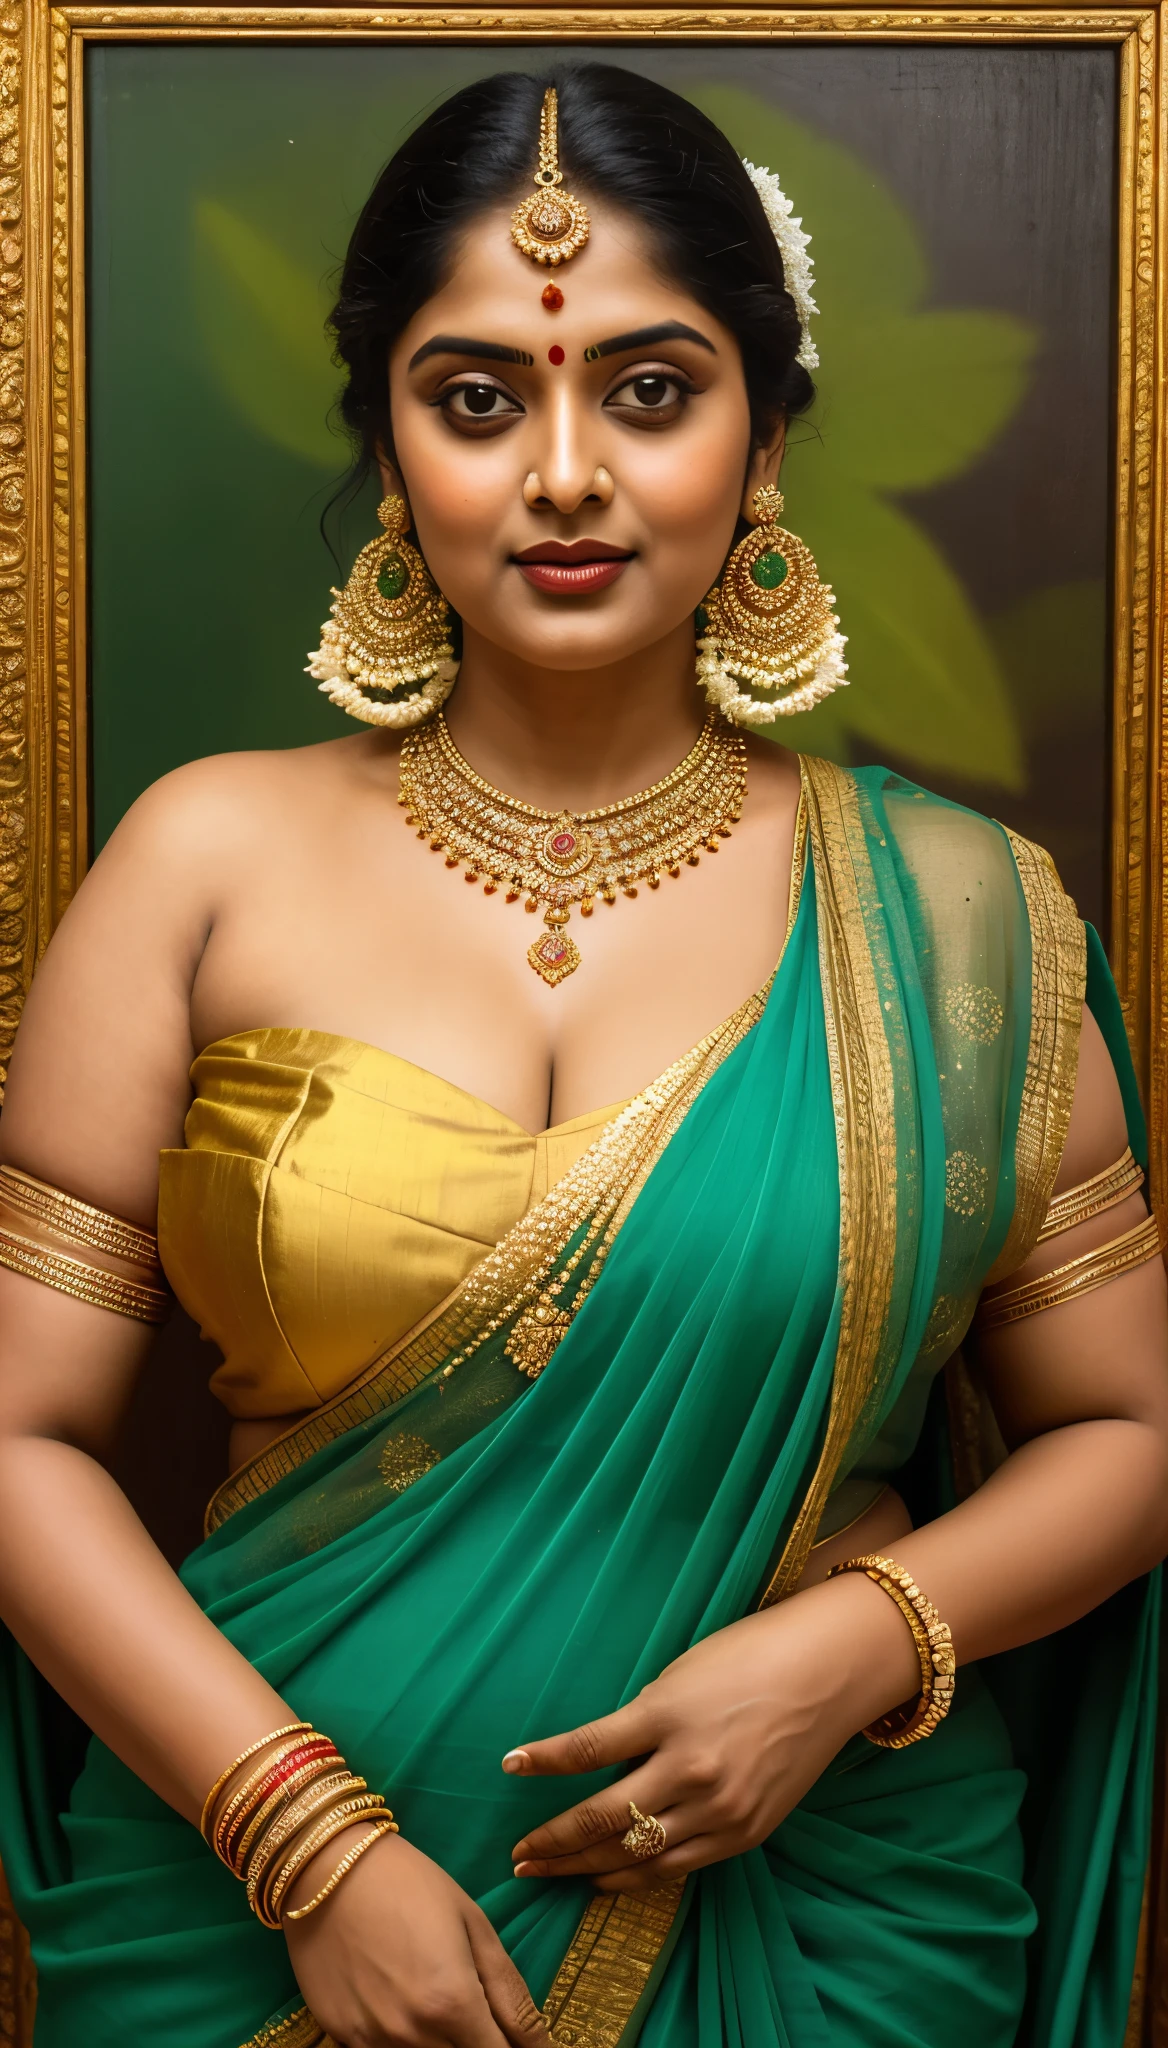 Beautiful painting of a woman in a sari with a necklace and earrings, beautiful thick figure, Thick curvy beauty, looks like Sandeepa Dhar, inspired by Raja Ravi Varma, szukalski ravi varma, portrait of a beautiful goddess, by Raja Ravi Varma, indian goddess, traditional beauty, a stunning portrait of a goddess, inspired by T. K. Padmini, indian art, indian goddess of wealth, portrait of a goddess